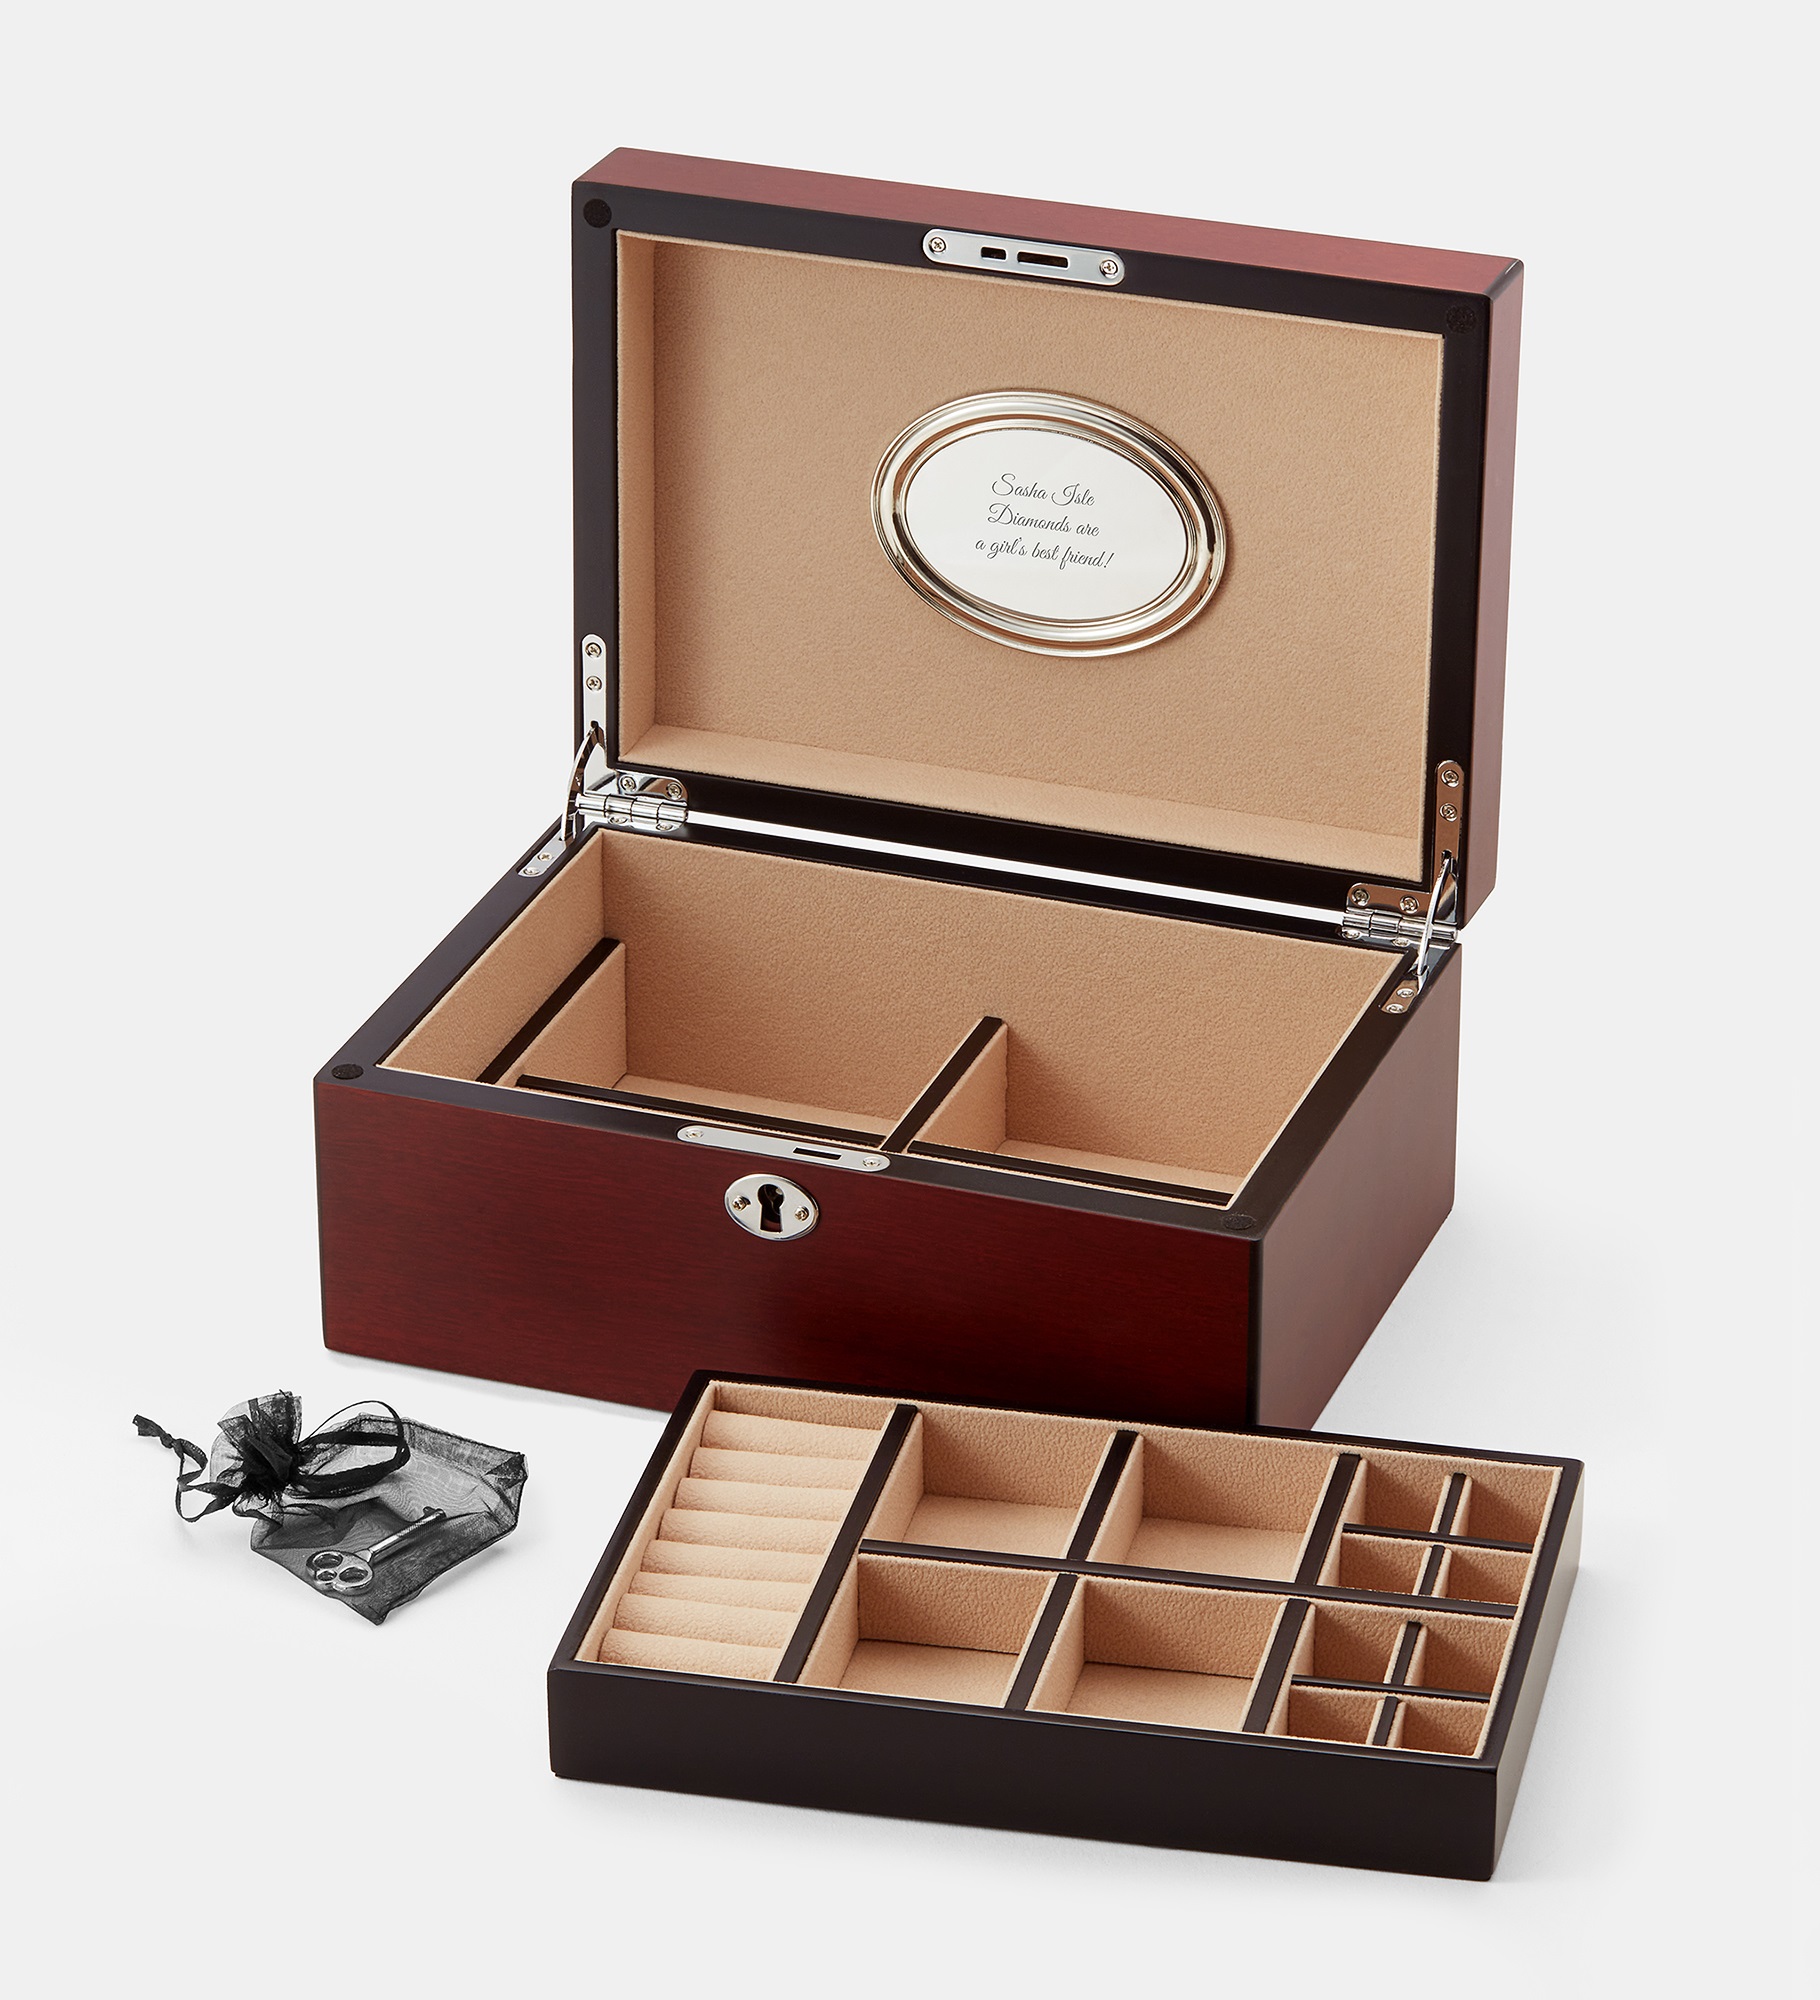  Engraved Matte-Finish Wooden Jewelry Box with Lock